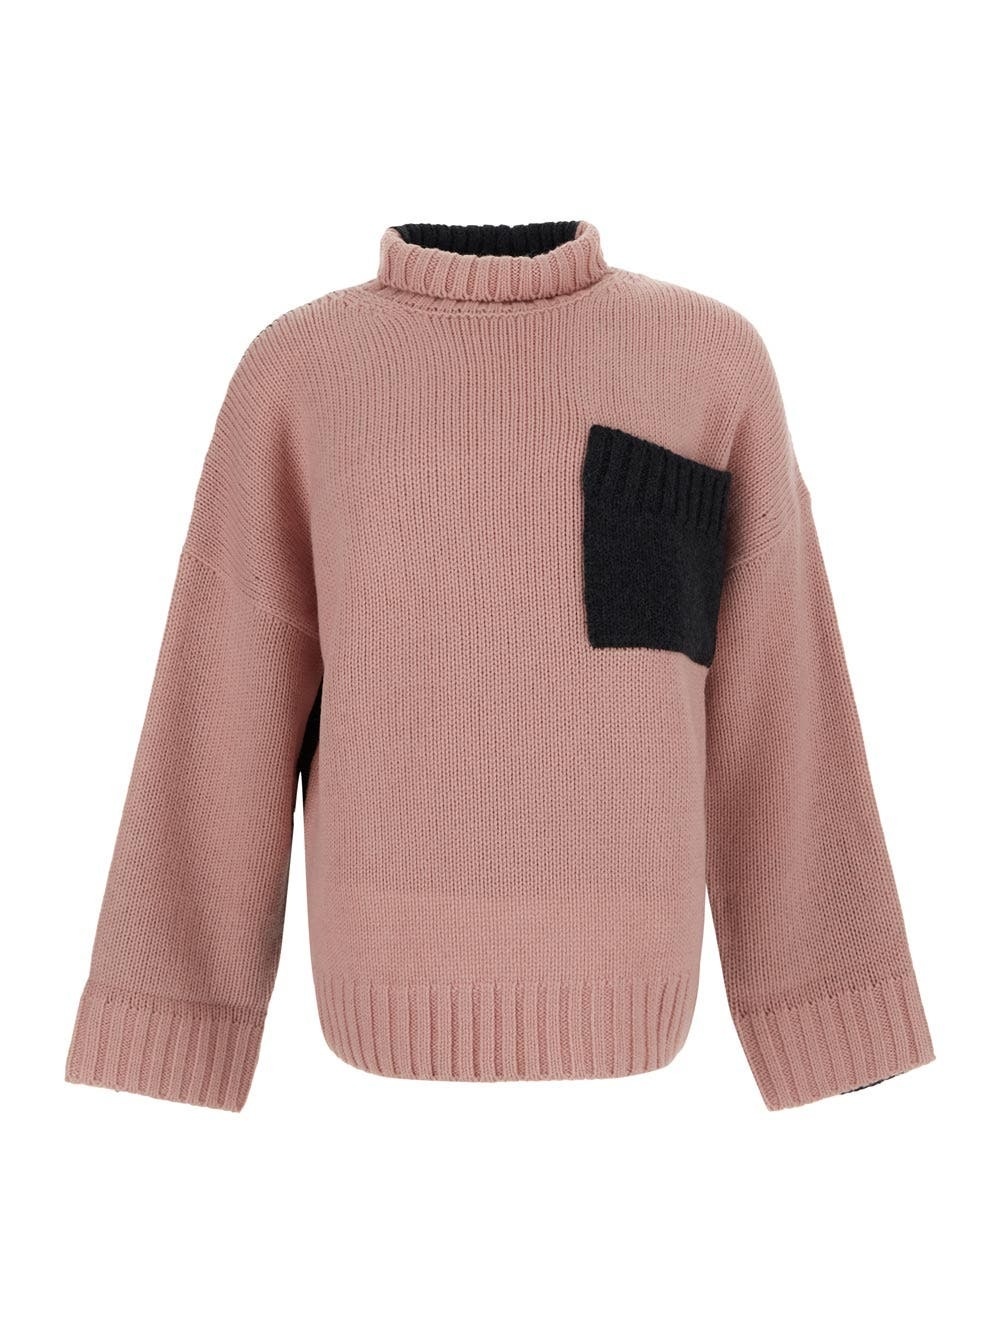 Photo: Jw Anderson Two Toned Knit Sweater